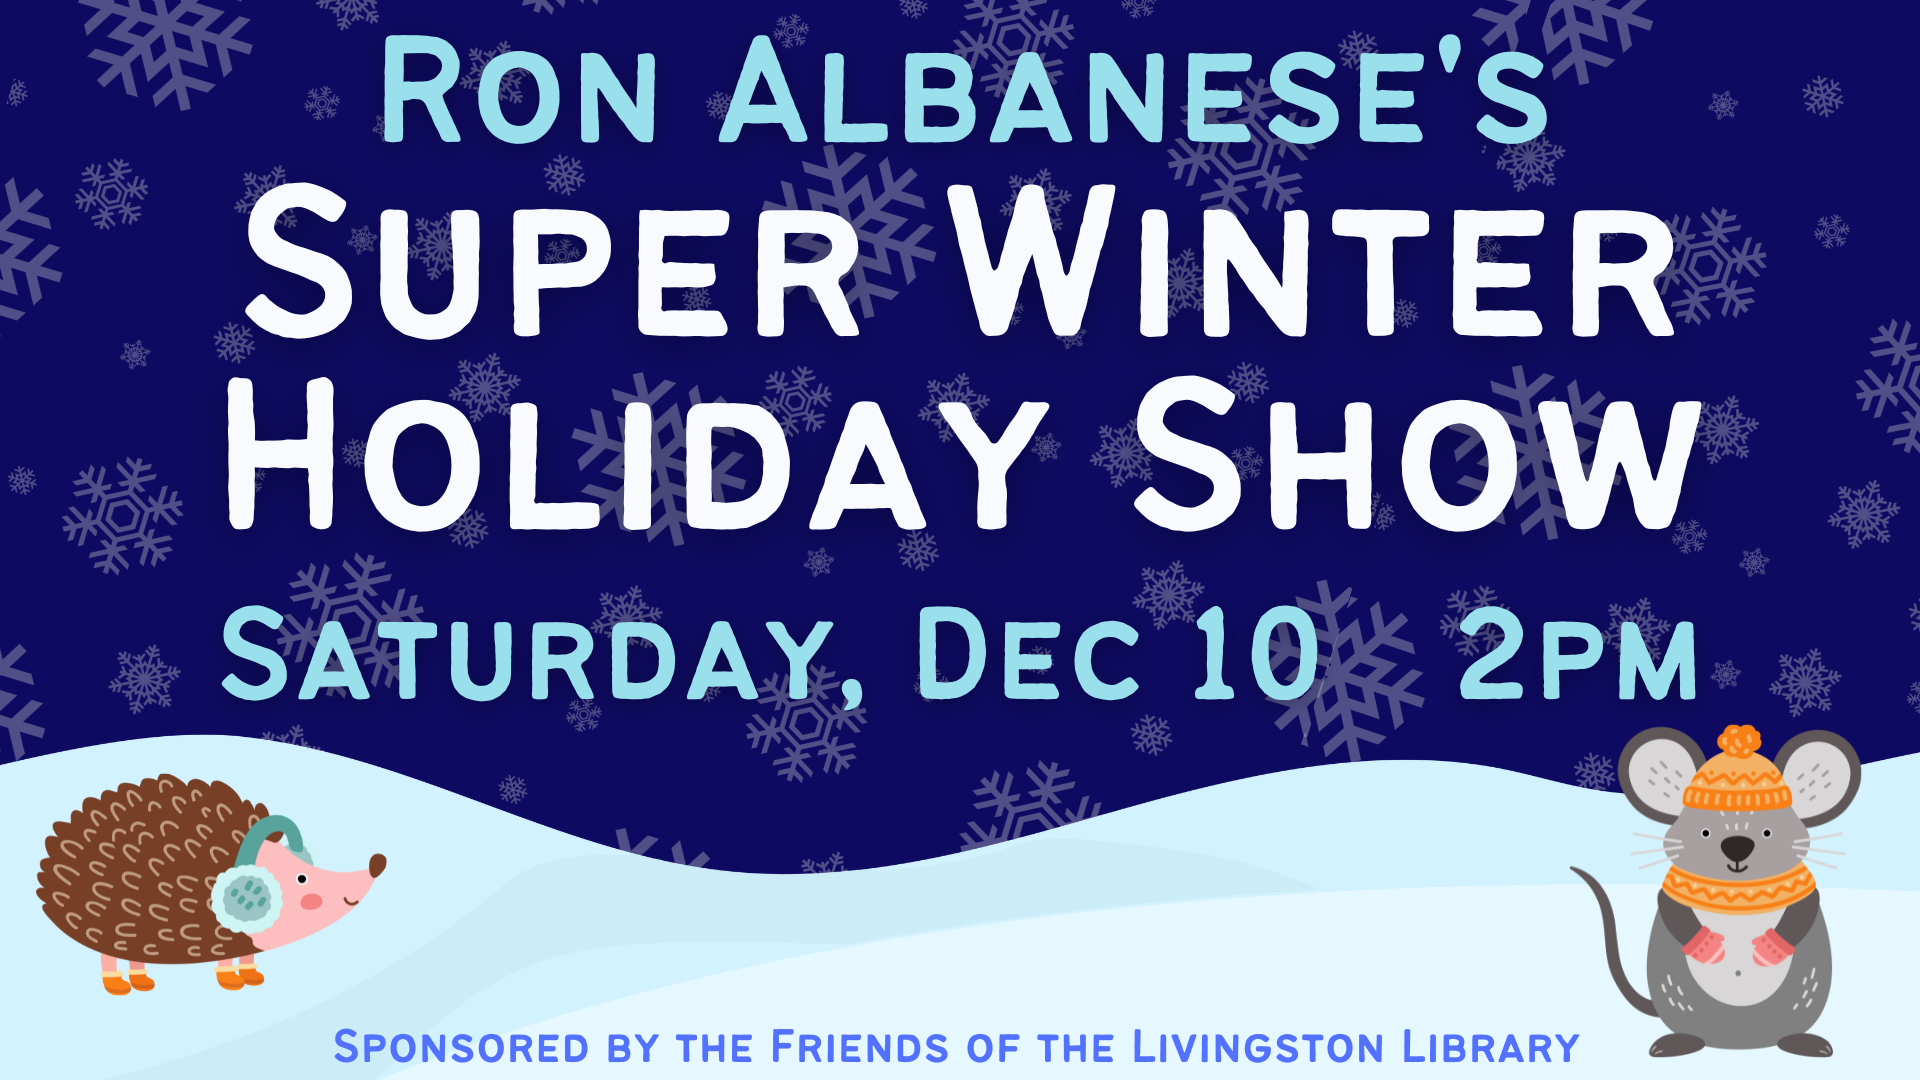 ron albanese's super winter holiday show in white text on a dark blue background with snowfall and cartoon animals in winter clothing